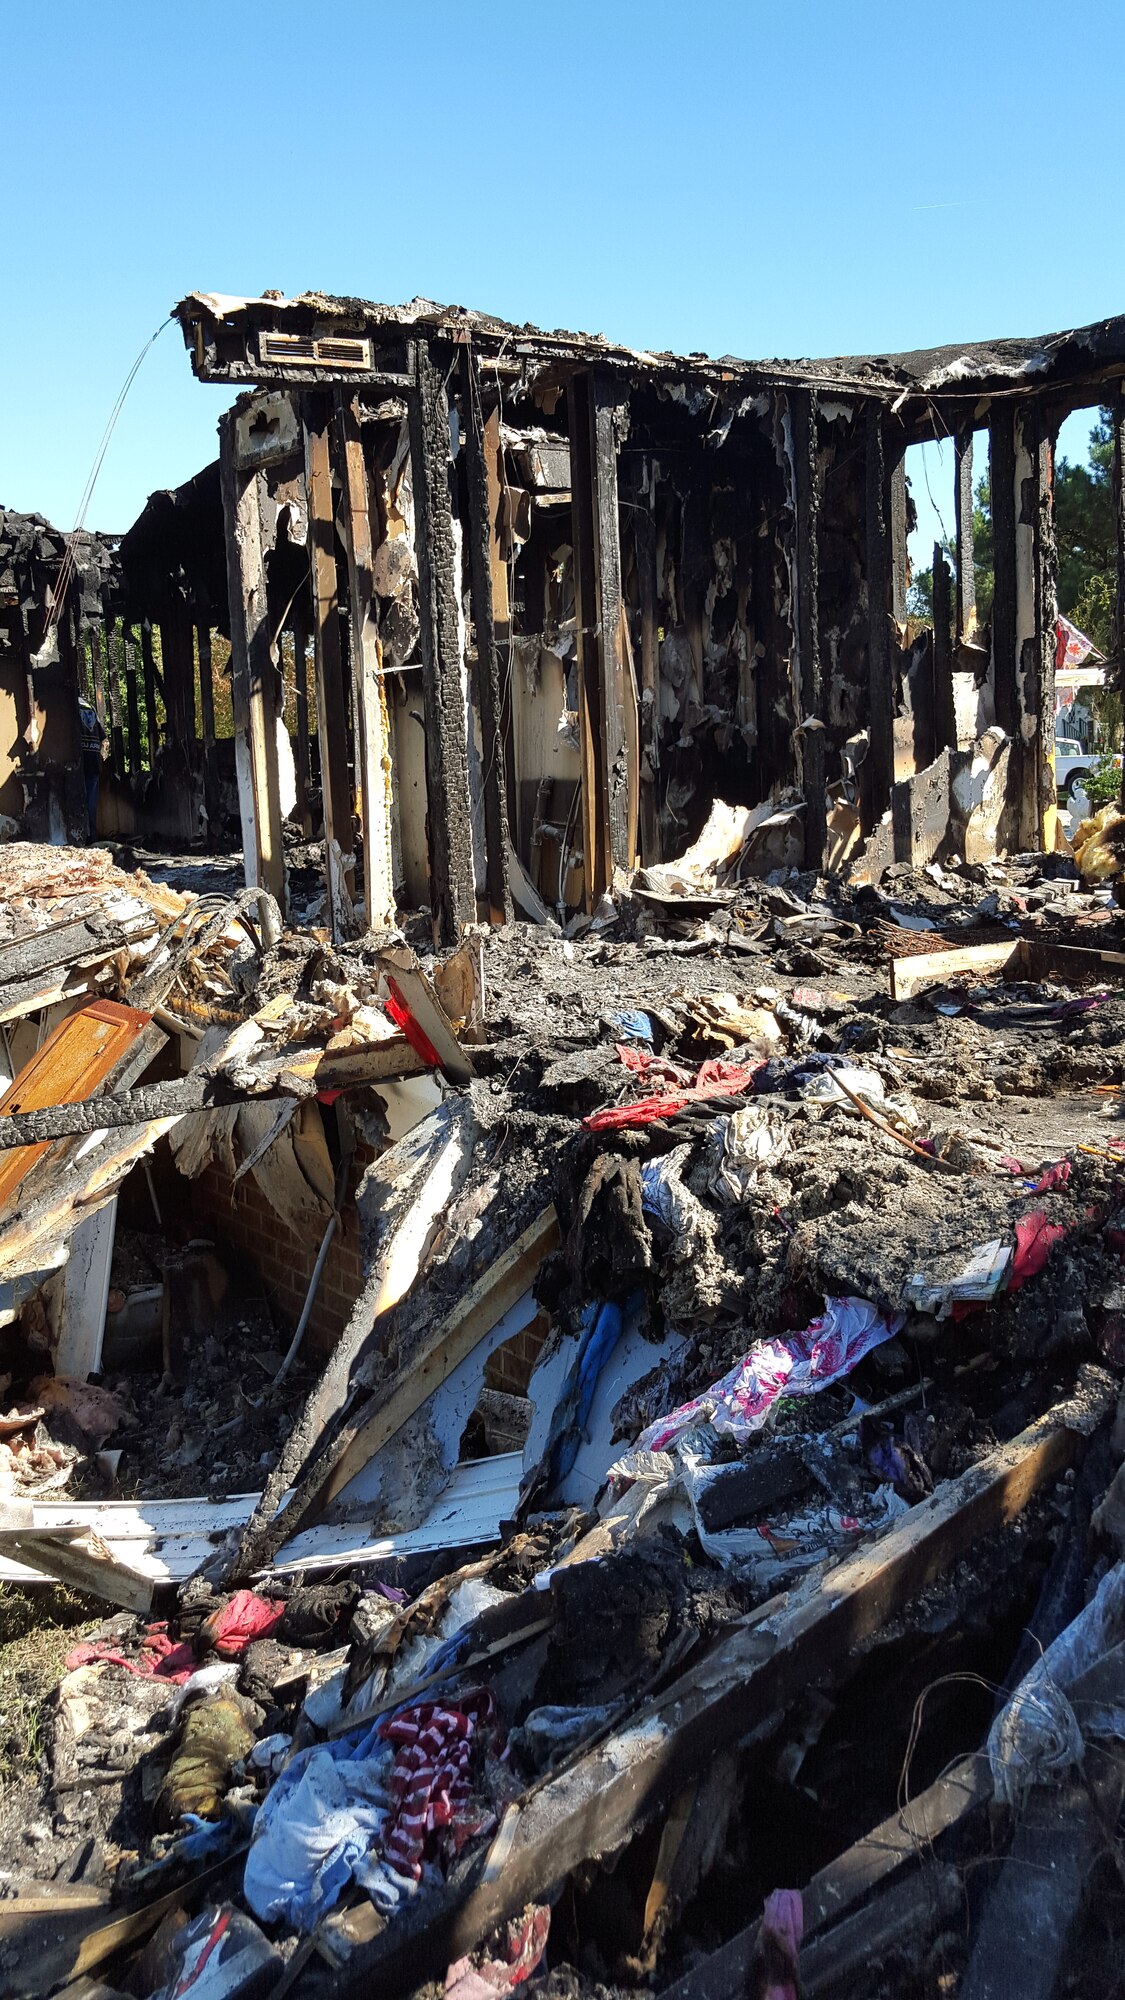 The charred remnants of Joe and Yvonne Mason’s house lay in rubble, Oct. 17, 2015, in Mar-Mac, North Carolina. The house caught fire Oct. 11 and was a complete loss for the family. Their neighbor, Tech. Sgt. Justin Manning, 4th Equipment Maintenance Squadron aerospace ground equipment technician, has helped the family clear the wreckage, even enlisting help from a local business to make the process quicker. (Courtesy photo)